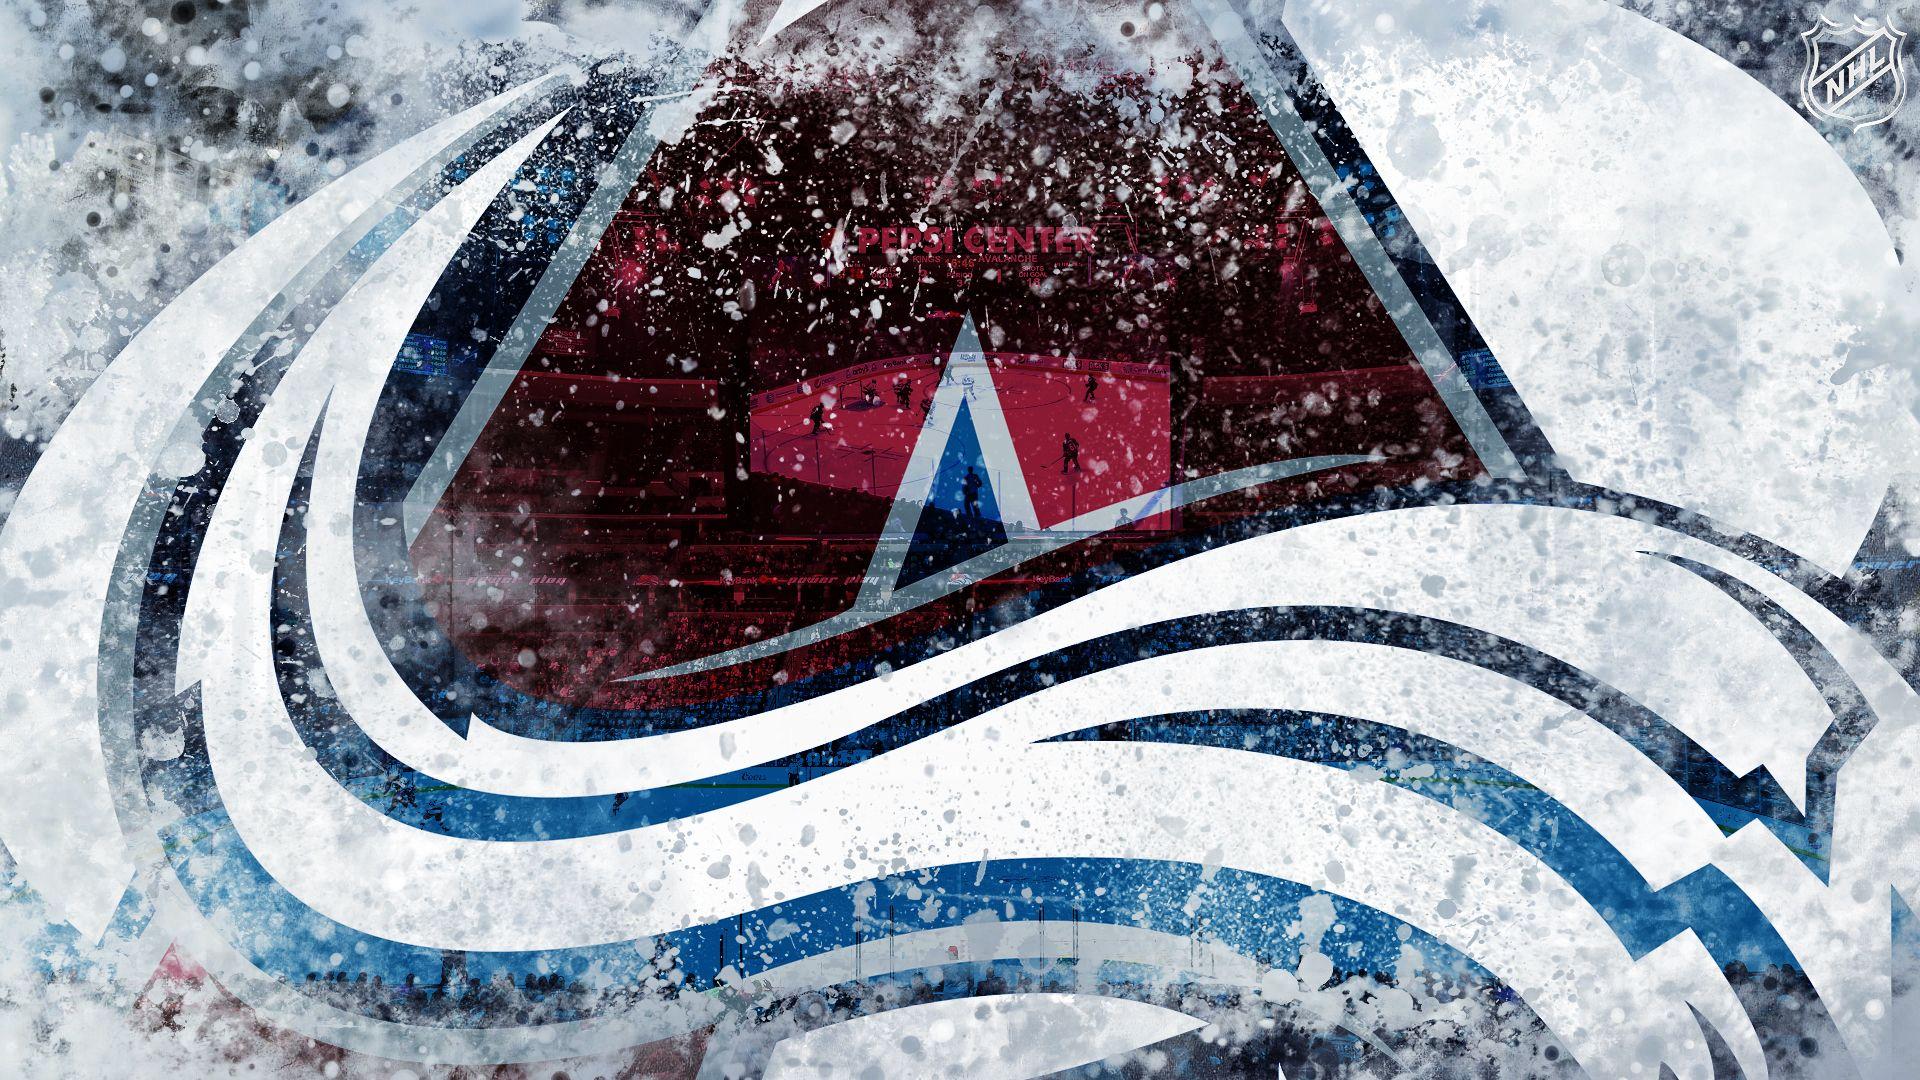 Colorado Avalanche Wallpapers - Top Free Colorado Avalanche Backgrounds ...